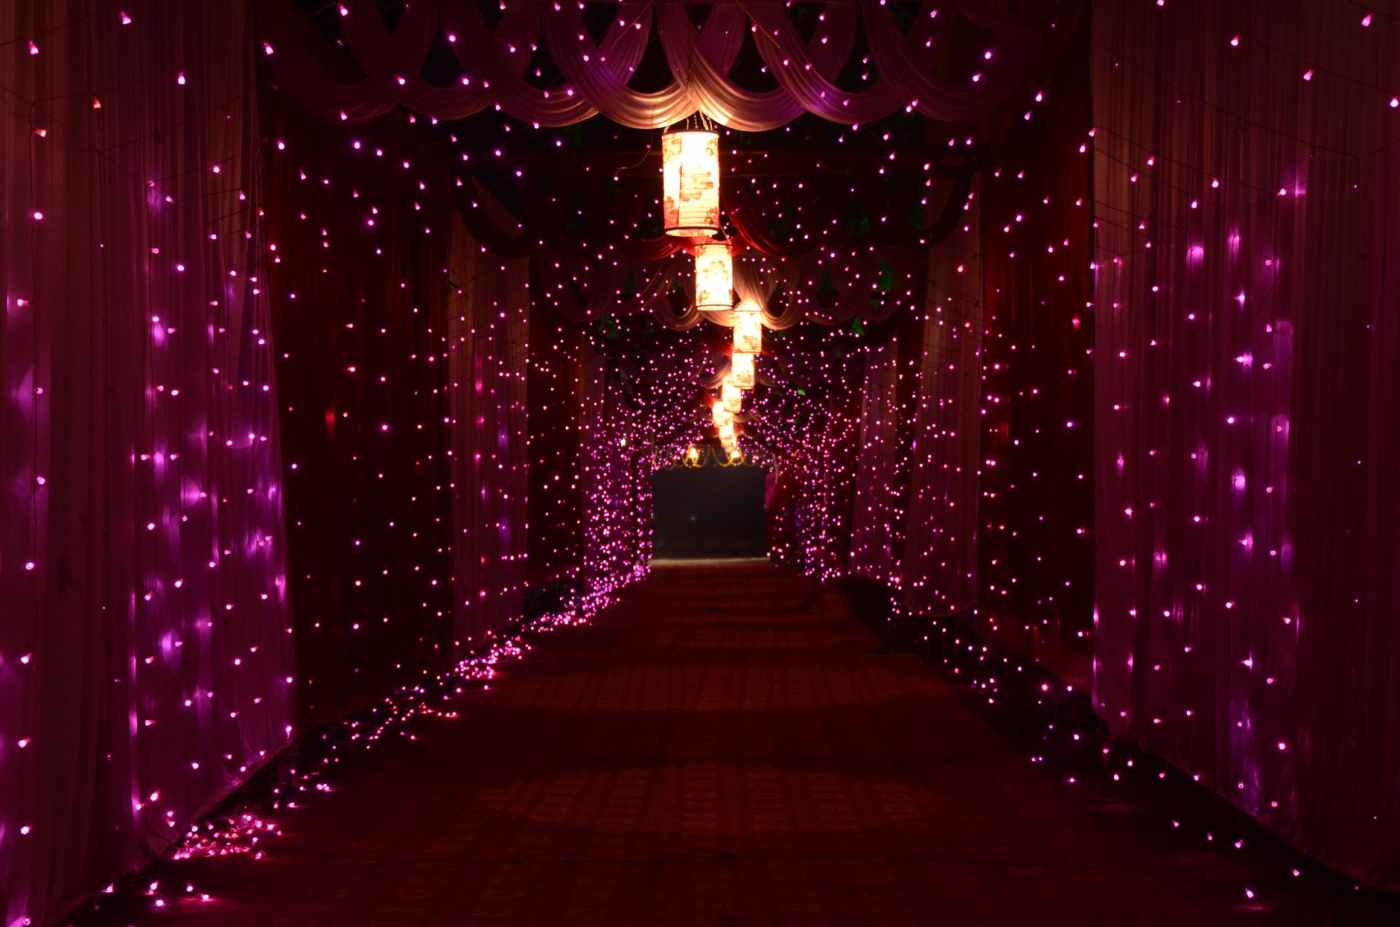 purple string lights and lamps with curtains